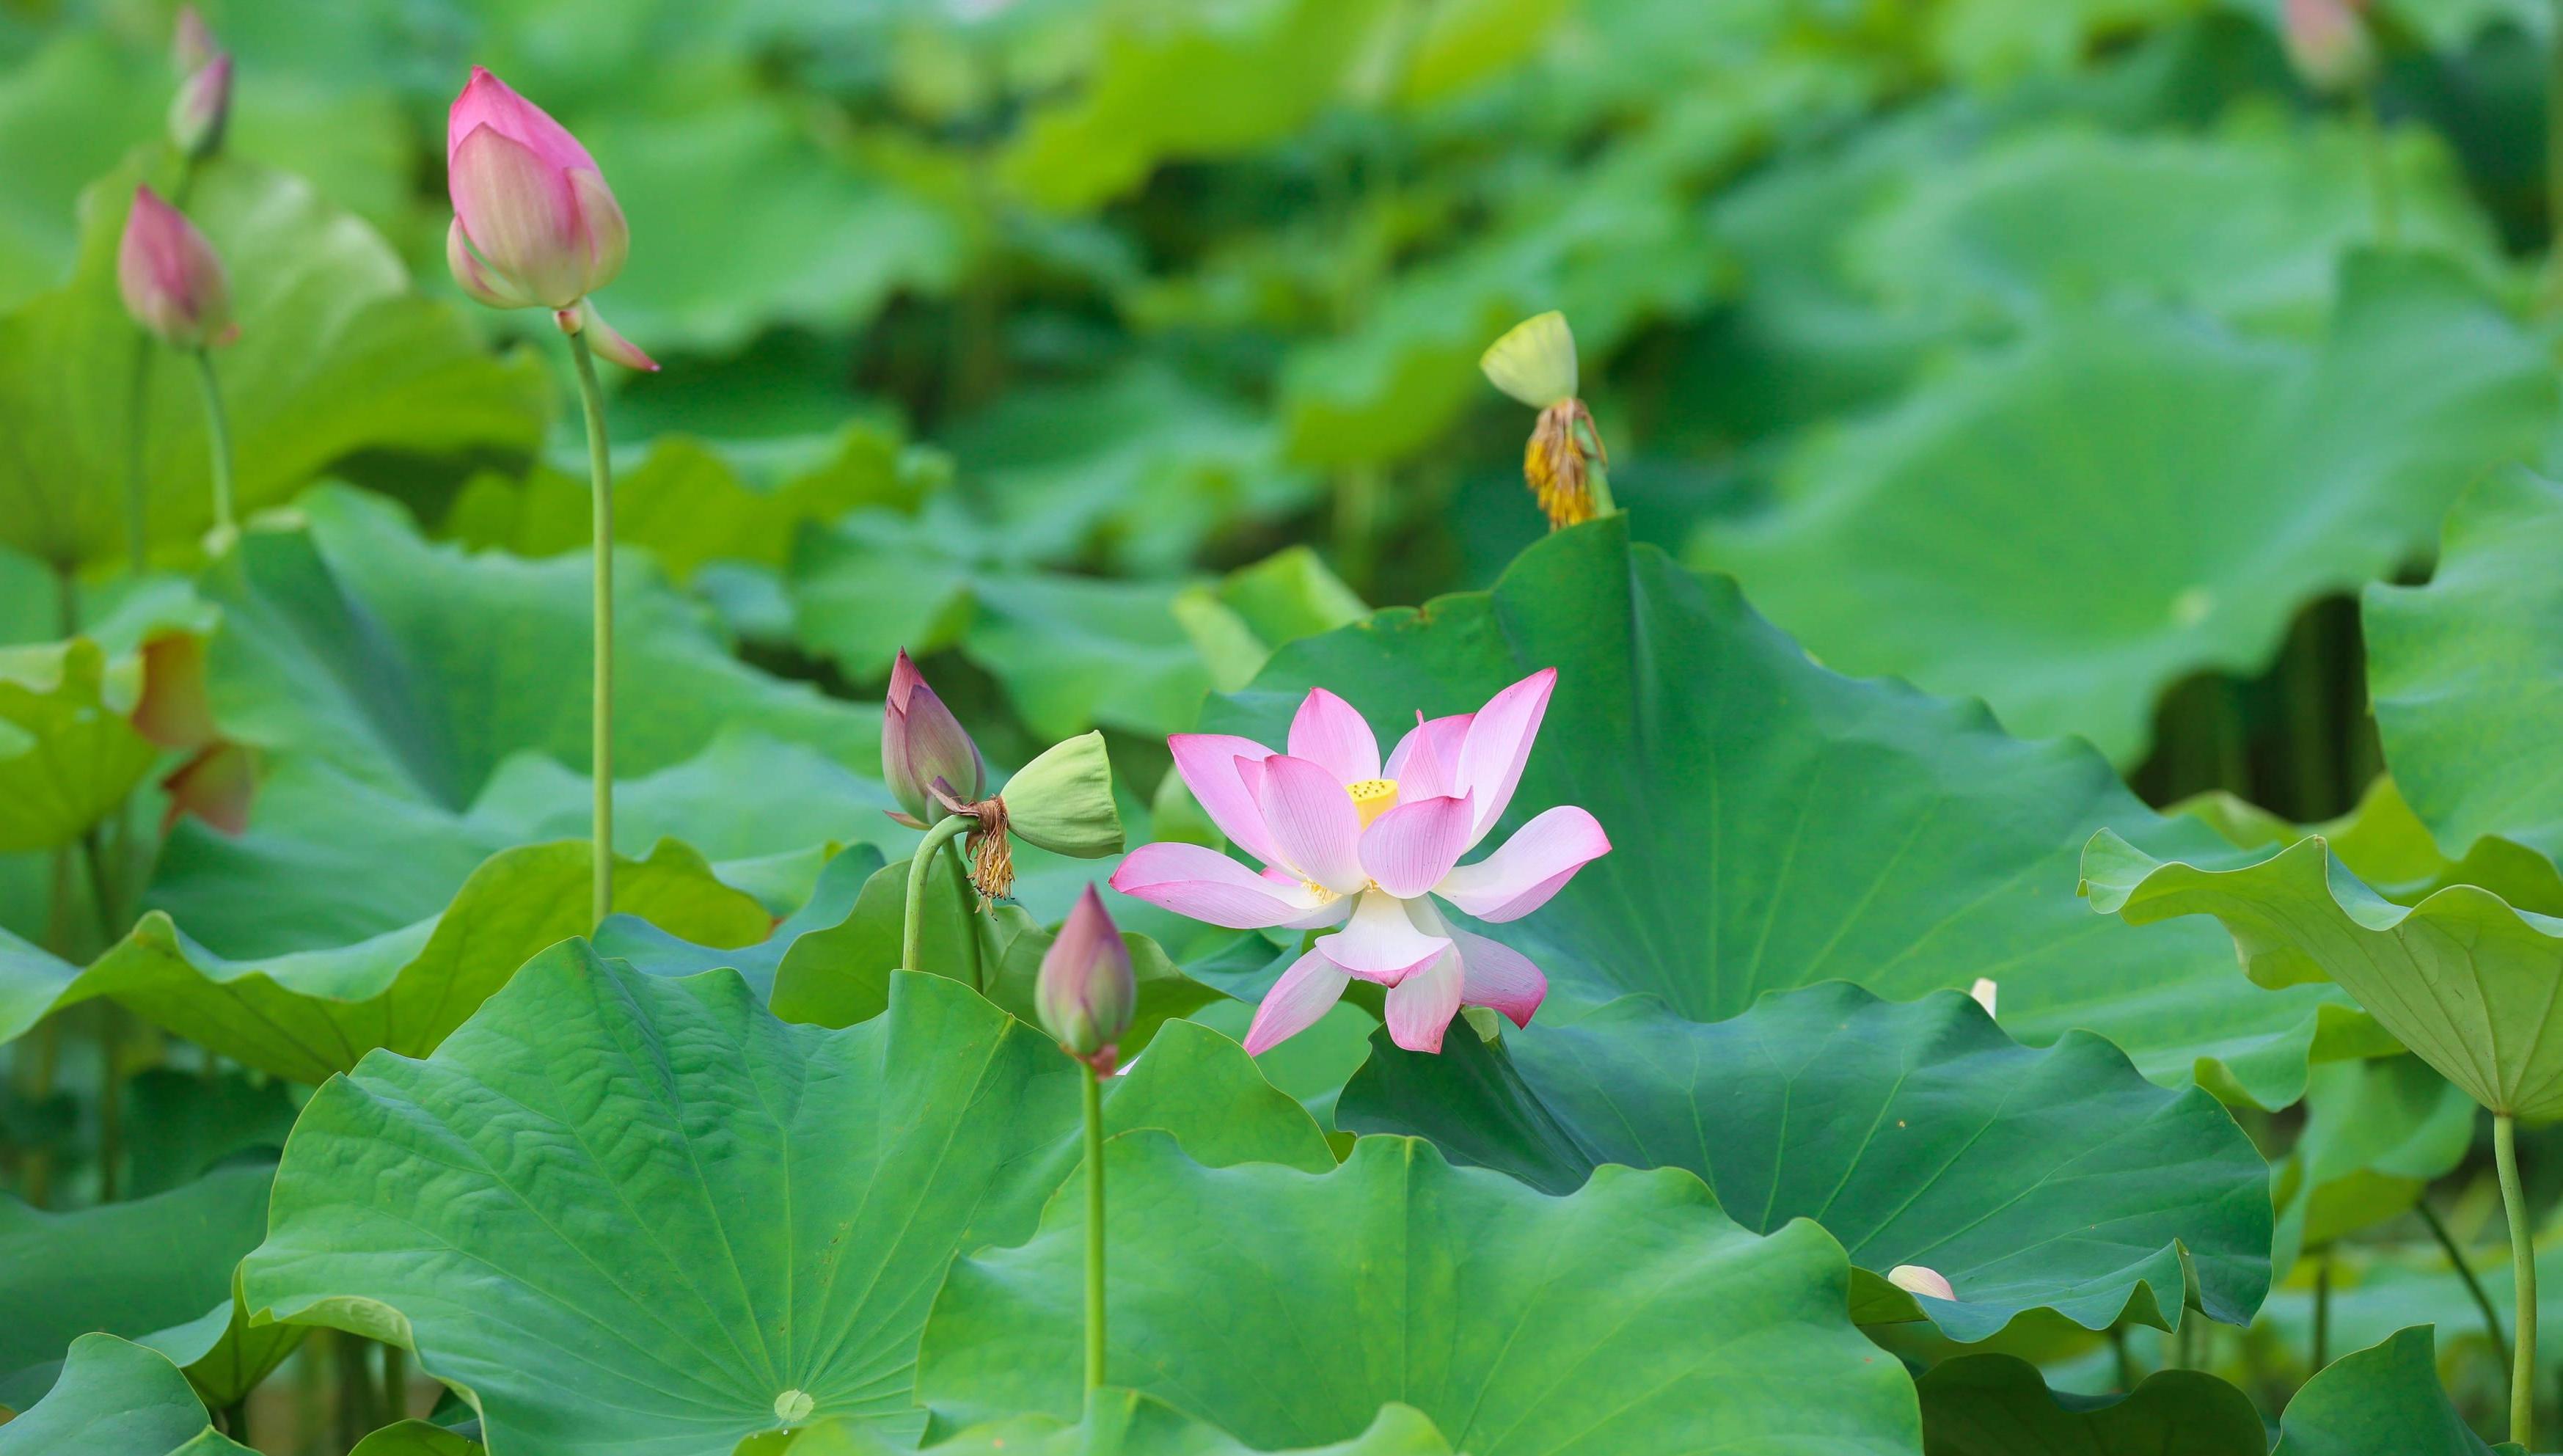 Liannan, Qingyuan: Lotus flowers appear even more delicate in the swaying lotus leaves